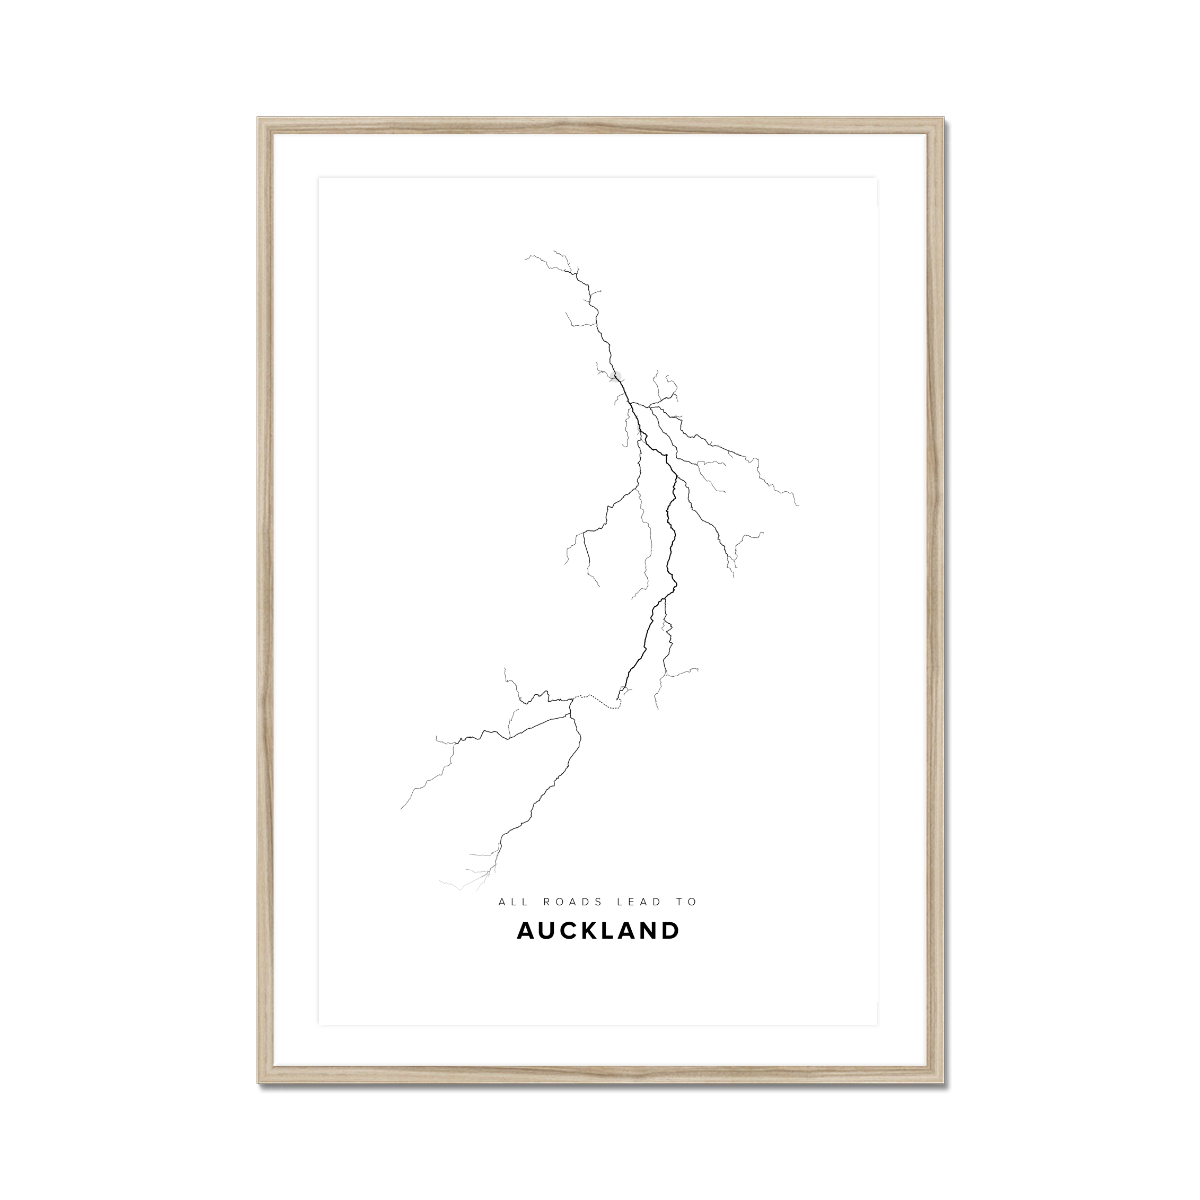 All roads lead to Auckland (New Zealand) Fine Art Map Print